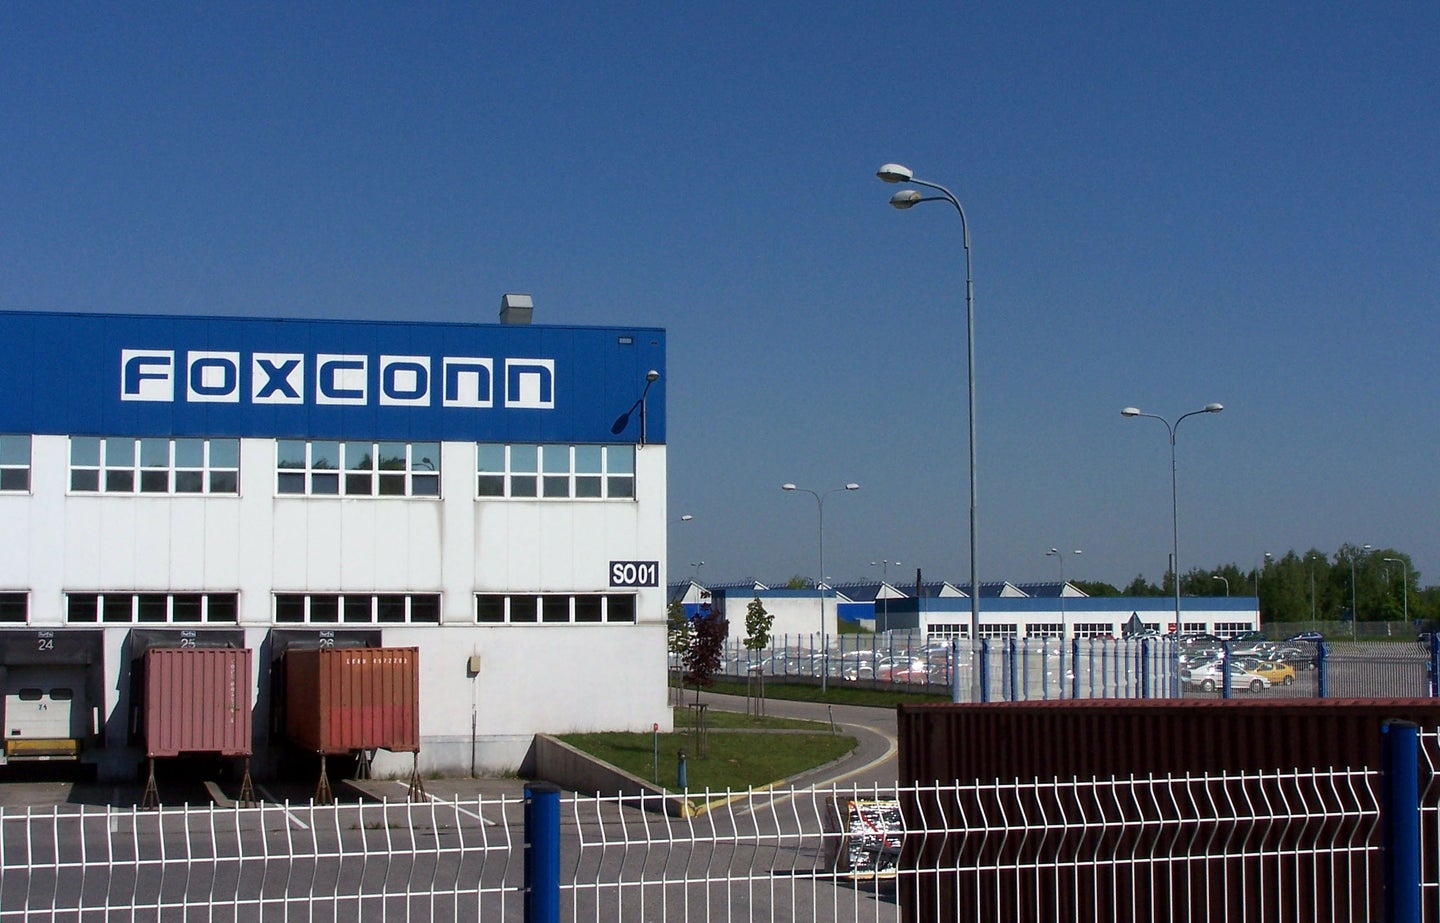 Foxconn Plans to Replace Its Gadget-Building Unhappy Human Workforce With 1 Million Robots